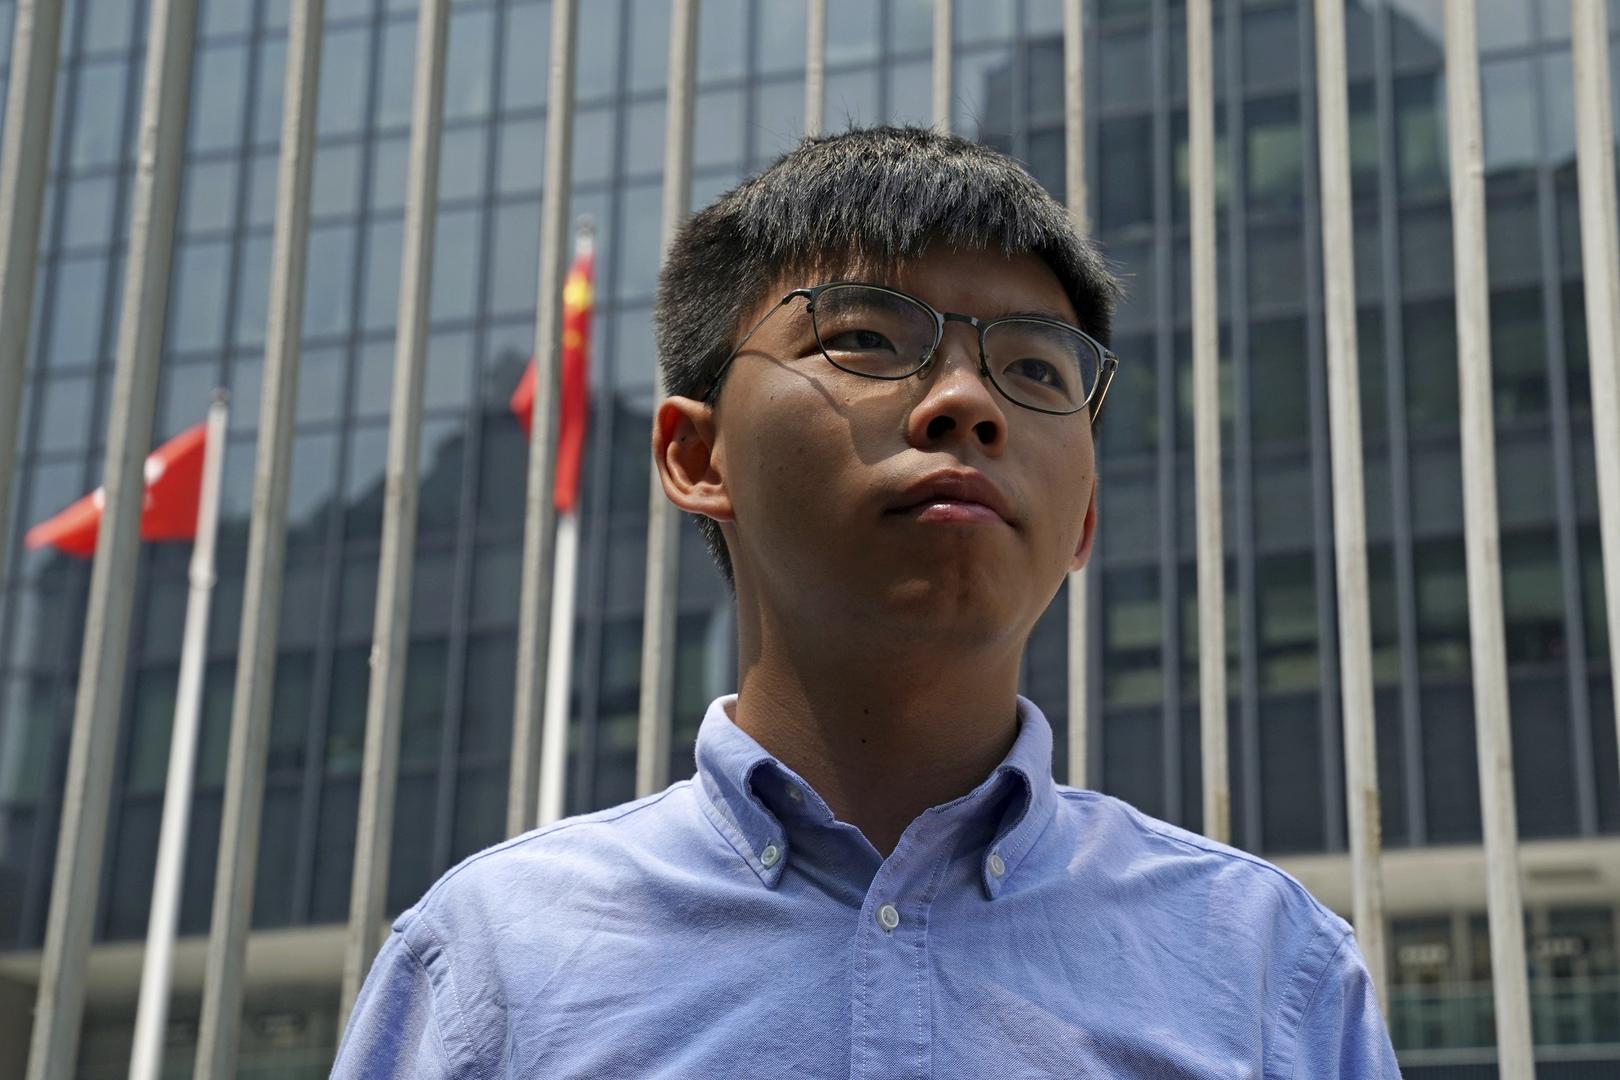 Hong Kong democratic activist Joshua Wong speaks to the media in Hong Kong, Saturday, Sept. 28, 2019. Wong announced plans to contest local elections and warns that any attempt to disqualify him will only spur more support for monthslong pro-democracy pro